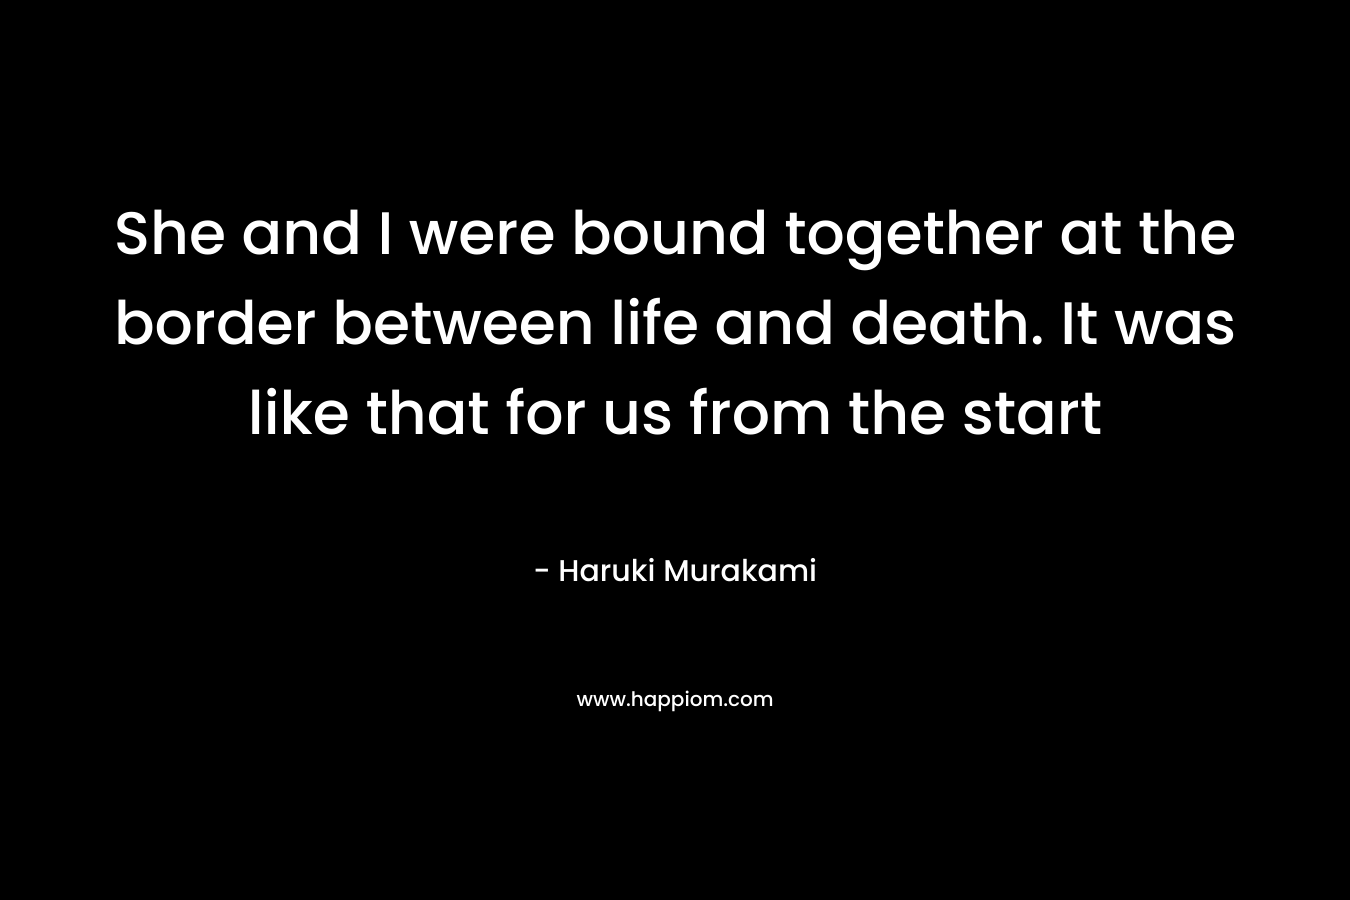 She and I were bound together at the border between life and death. It was like that for us from the start